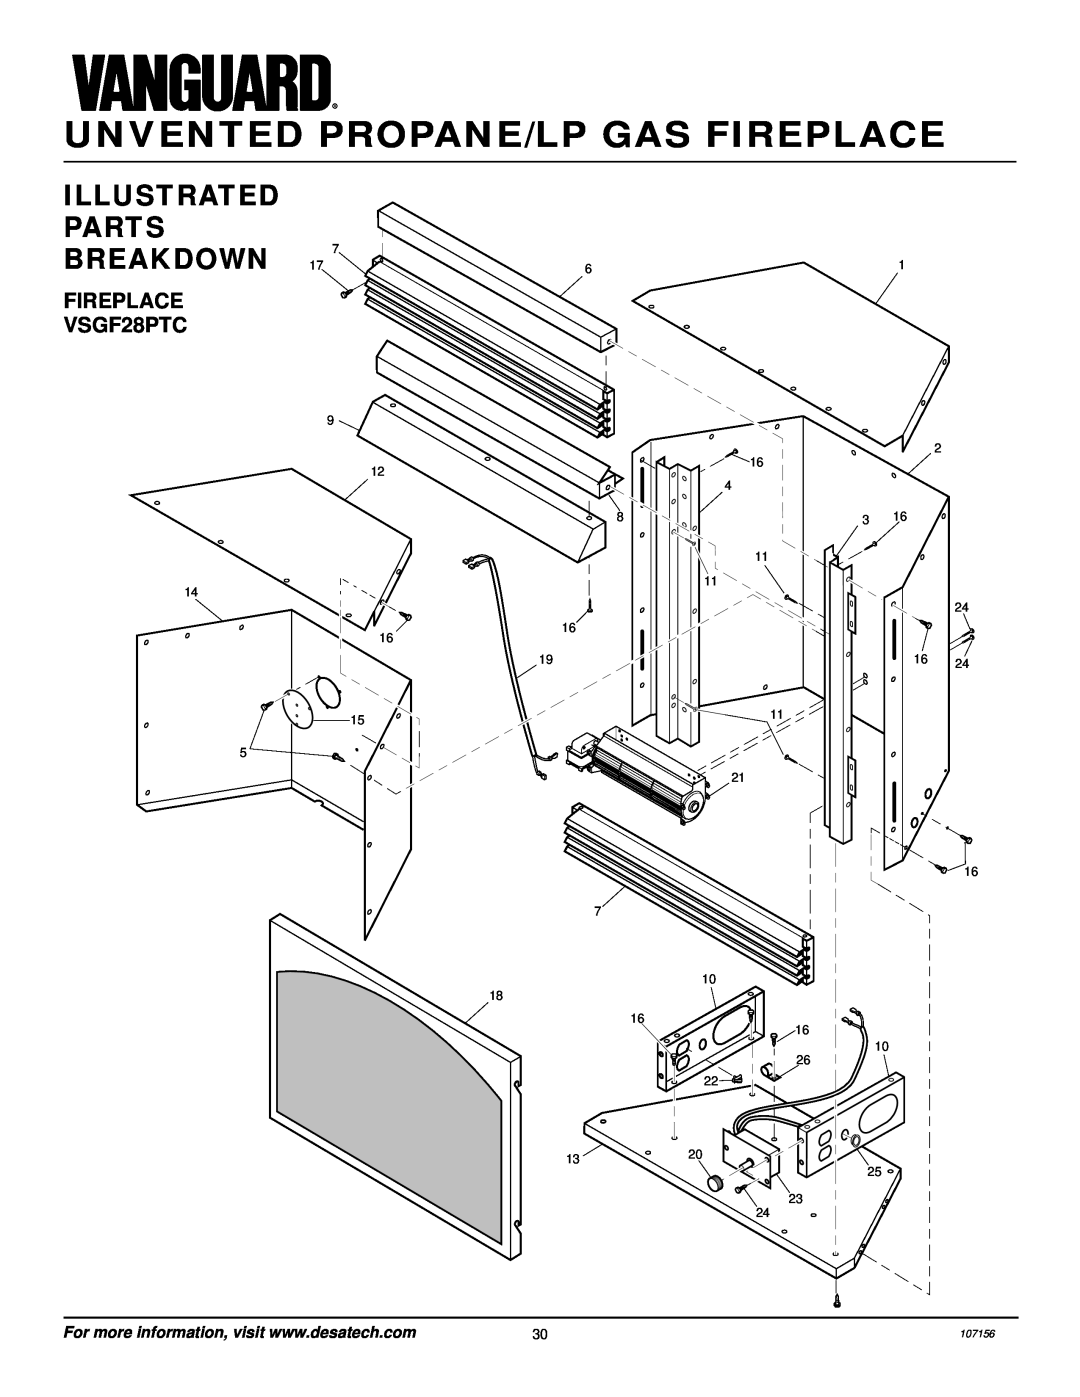 Vanguard Heating FIREPLACE VSGF28PTC, Unvented Propane/Lp Gas Fireplace, Illustrated Parts Breakdown, 8 16 19 7, 107156 